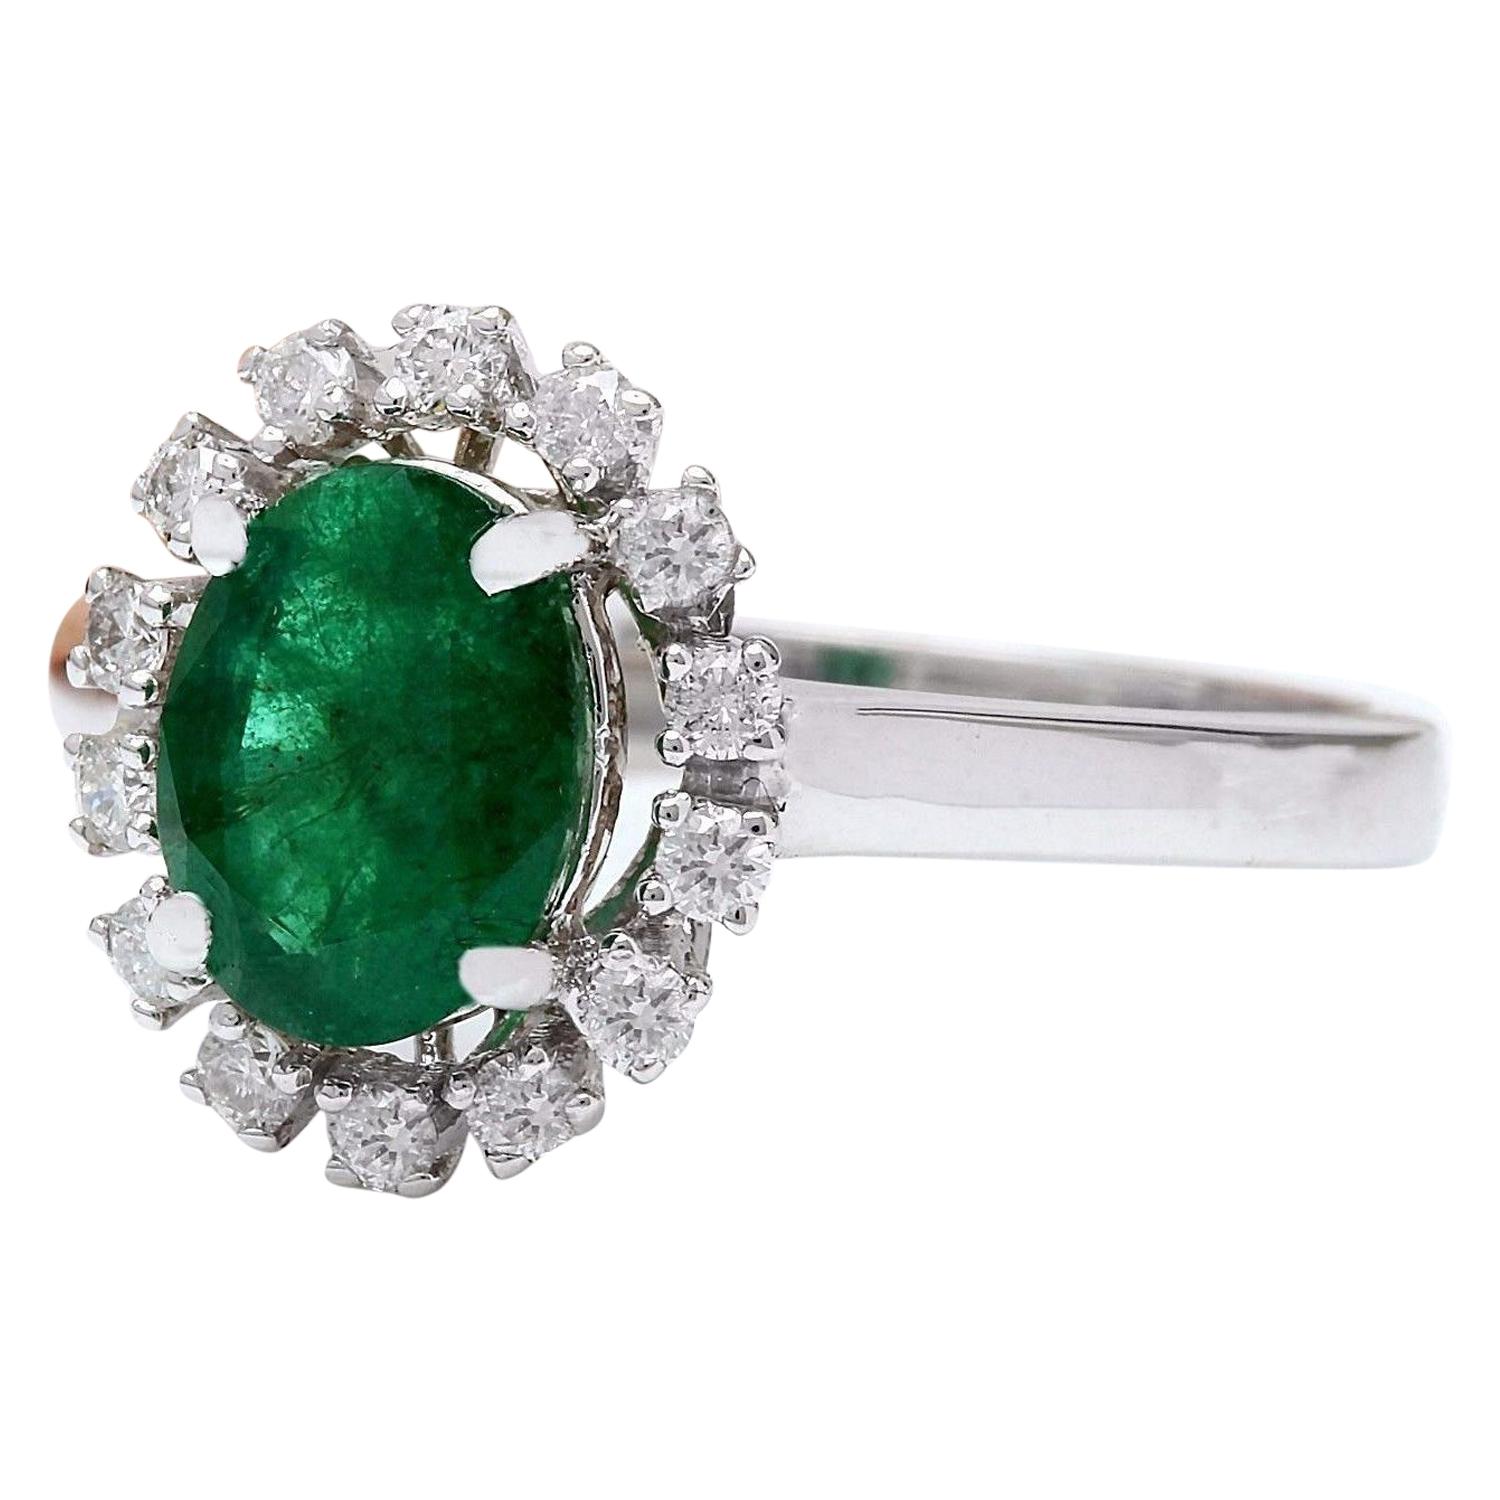 1.51 Carat Natural Emerald 14K Solid White Gold Diamond Ring
 Item Type: Ring
 Item Style: Engagement
 Material: 14K White Gold
 Mainstone: Emerald
 Stone Color: Green
 Stone Weight: 1.26 Carat
 Stone Shape: Oval
 Stone Quantity: 1
 Stone